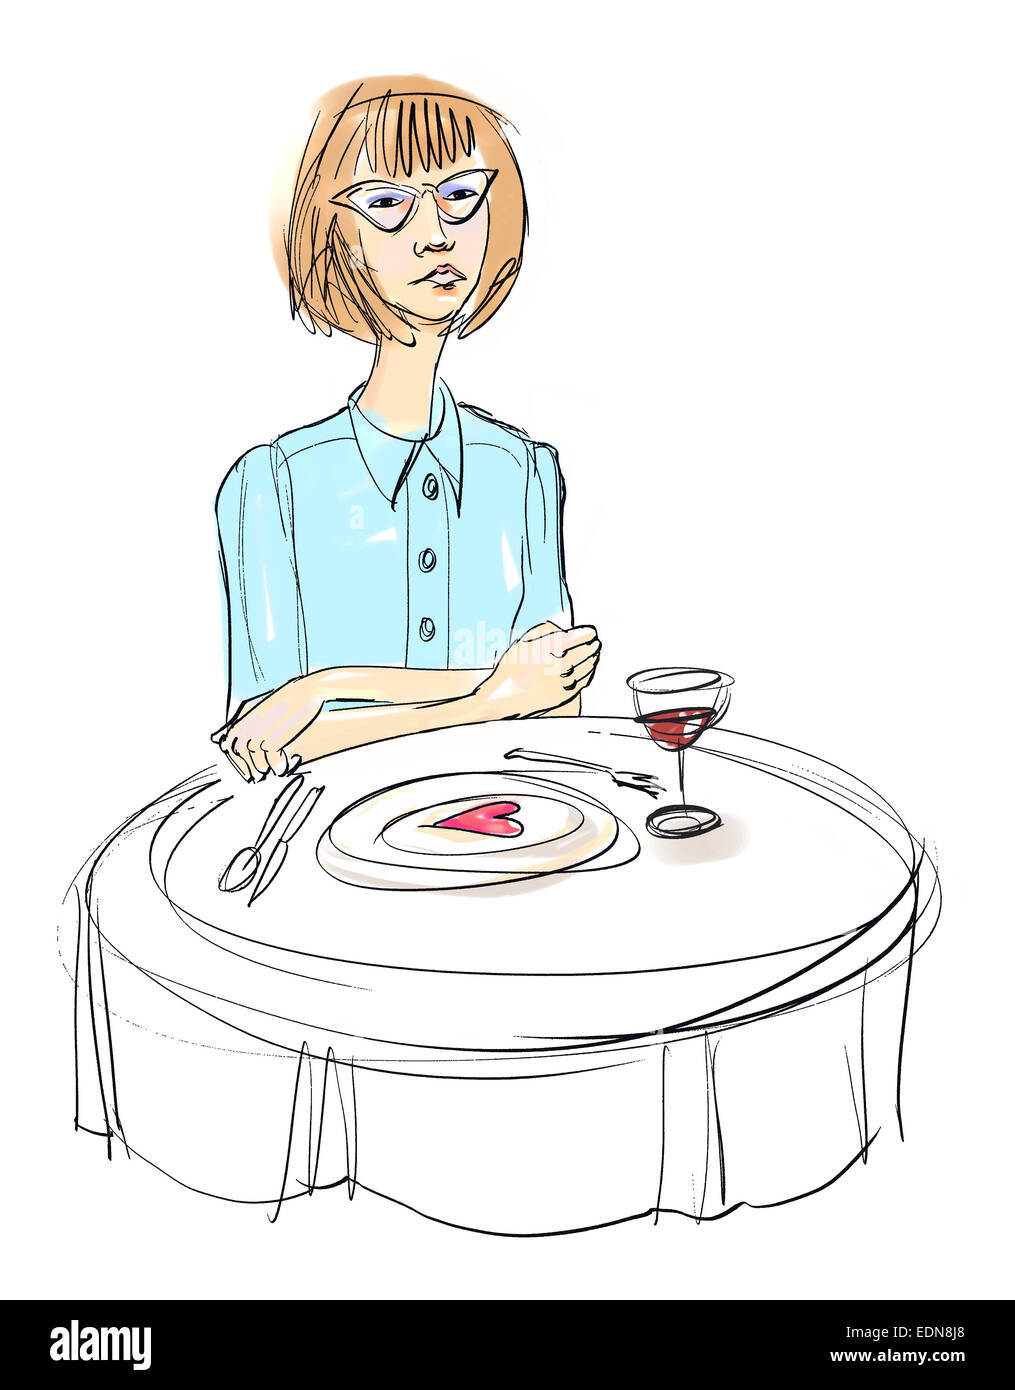 Ink and wash style illustration of a young woman with eyeglasses dining in a restaurant alone, a stylized broken heart in plate. Stock Photo